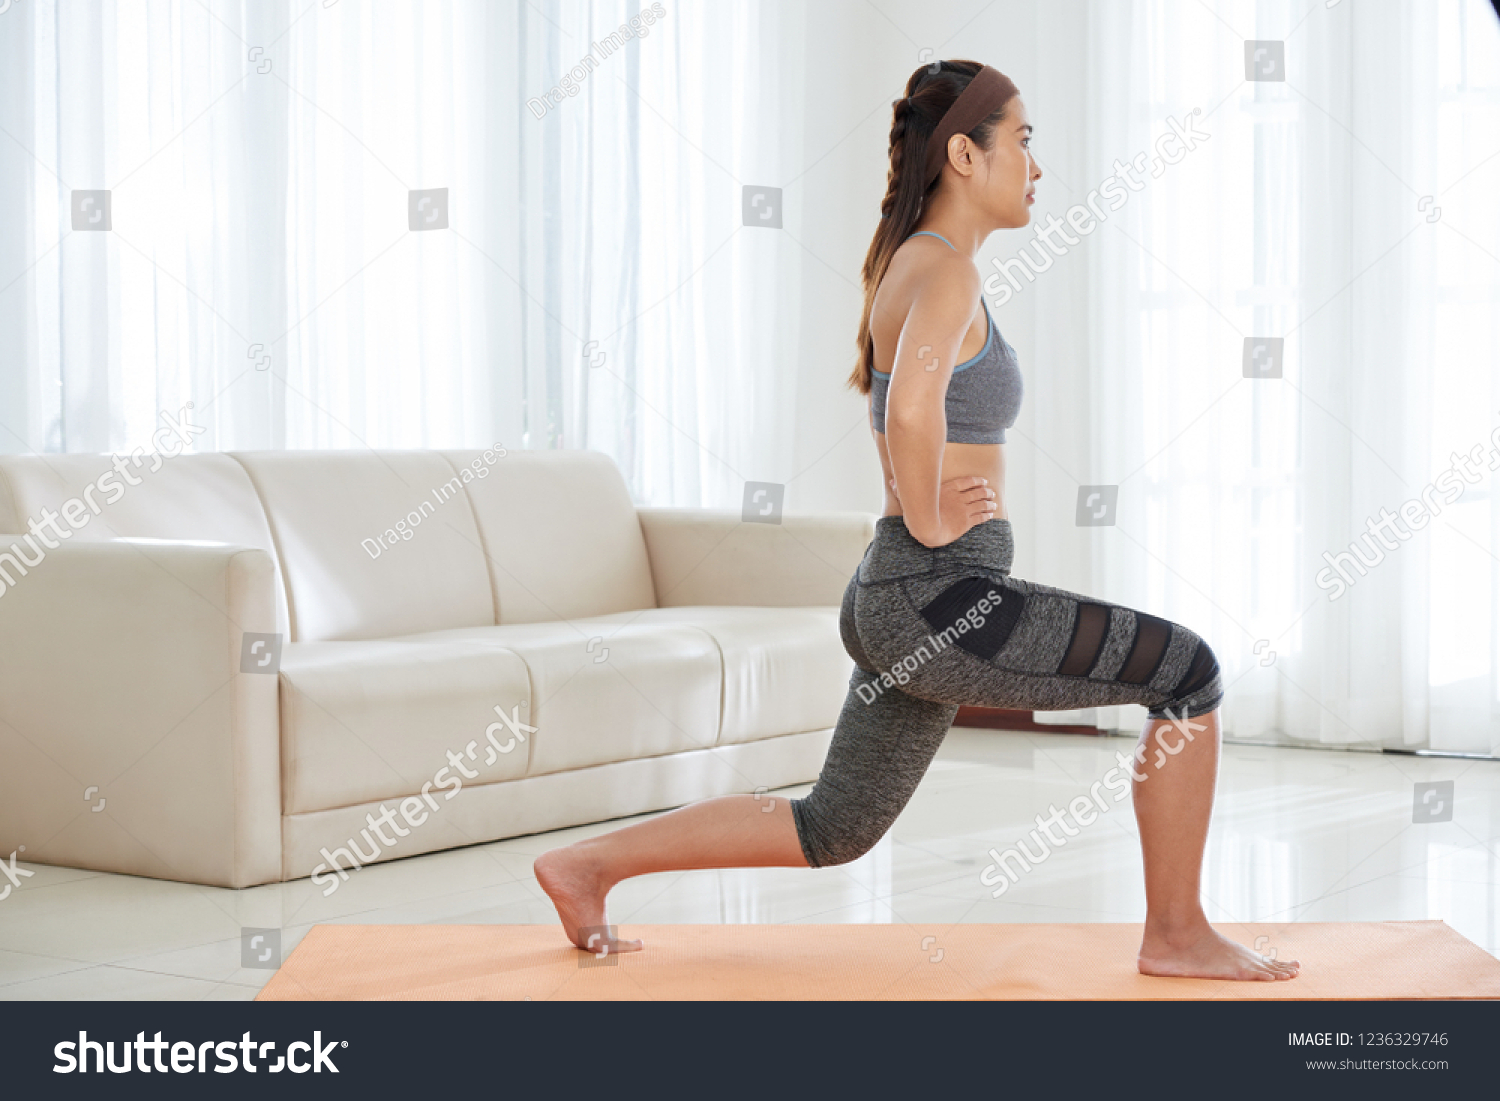 Side view of young athletic Asian woman in activewear doing lunge exercise while having workout at home #1236329746